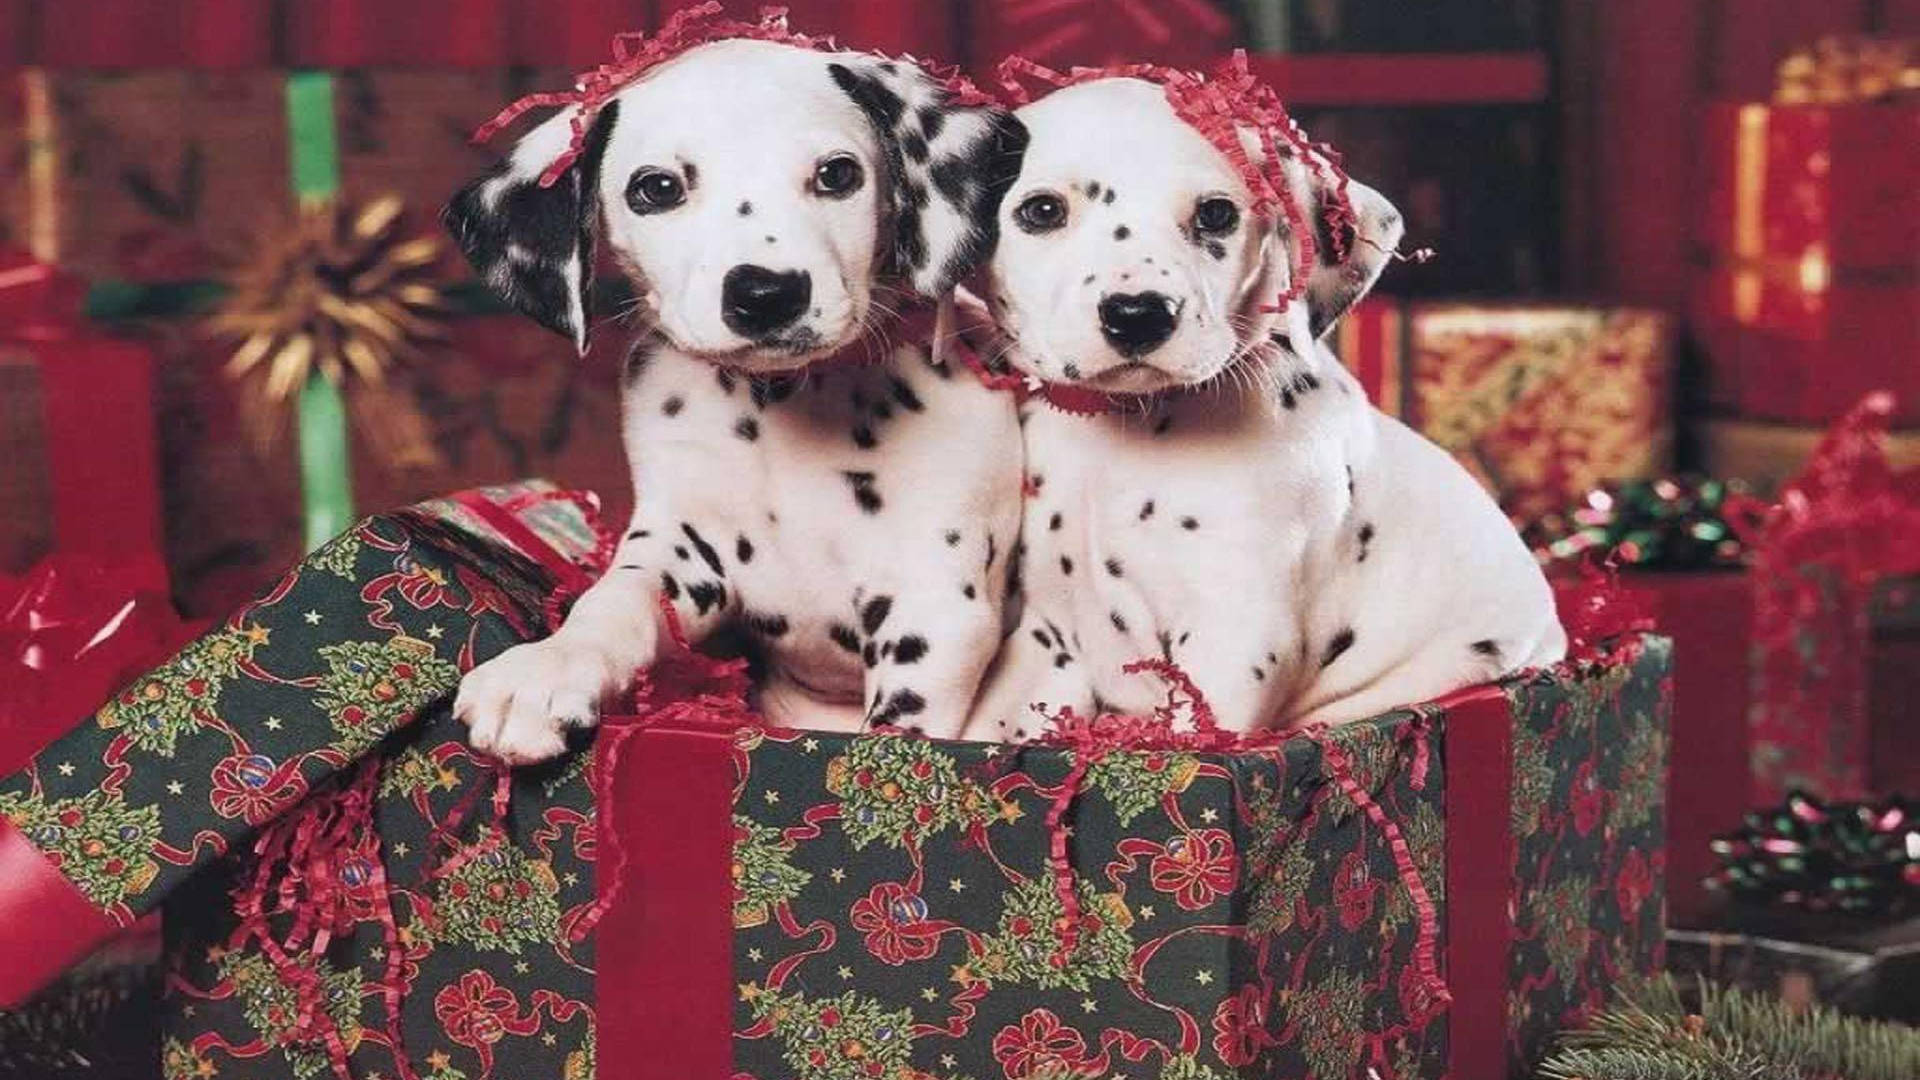 Dalmatian Dogs In Christmas Gift Box